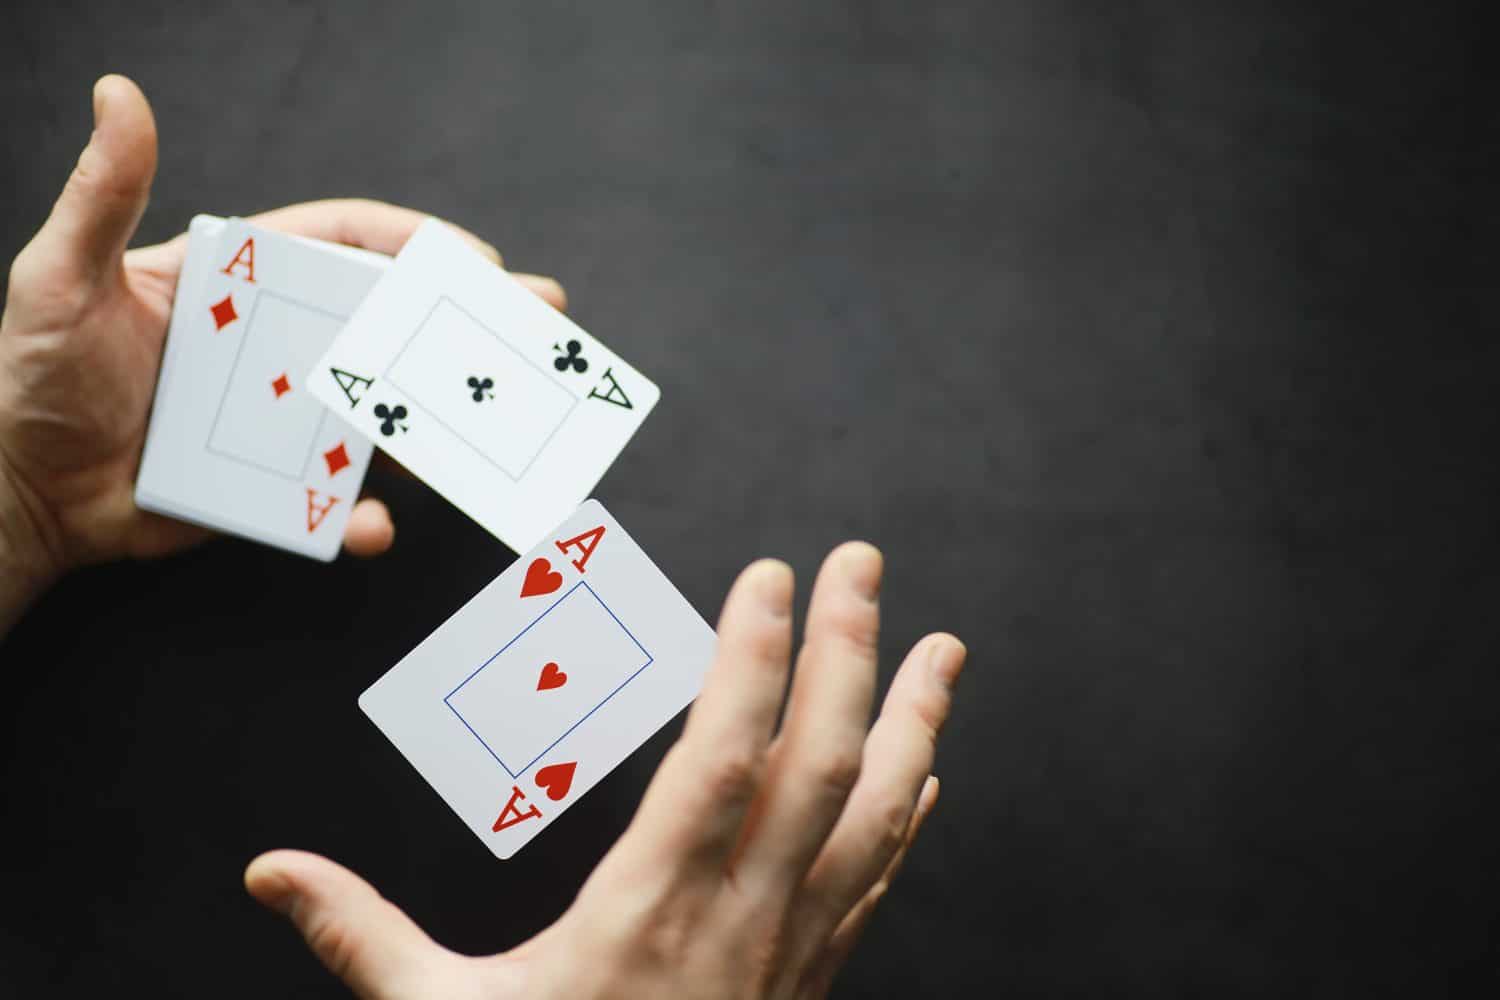 The concept card tricks and presentations. The concept of a sharpie in games. Flying cards in the air. A magician raises cards with the power of thought.